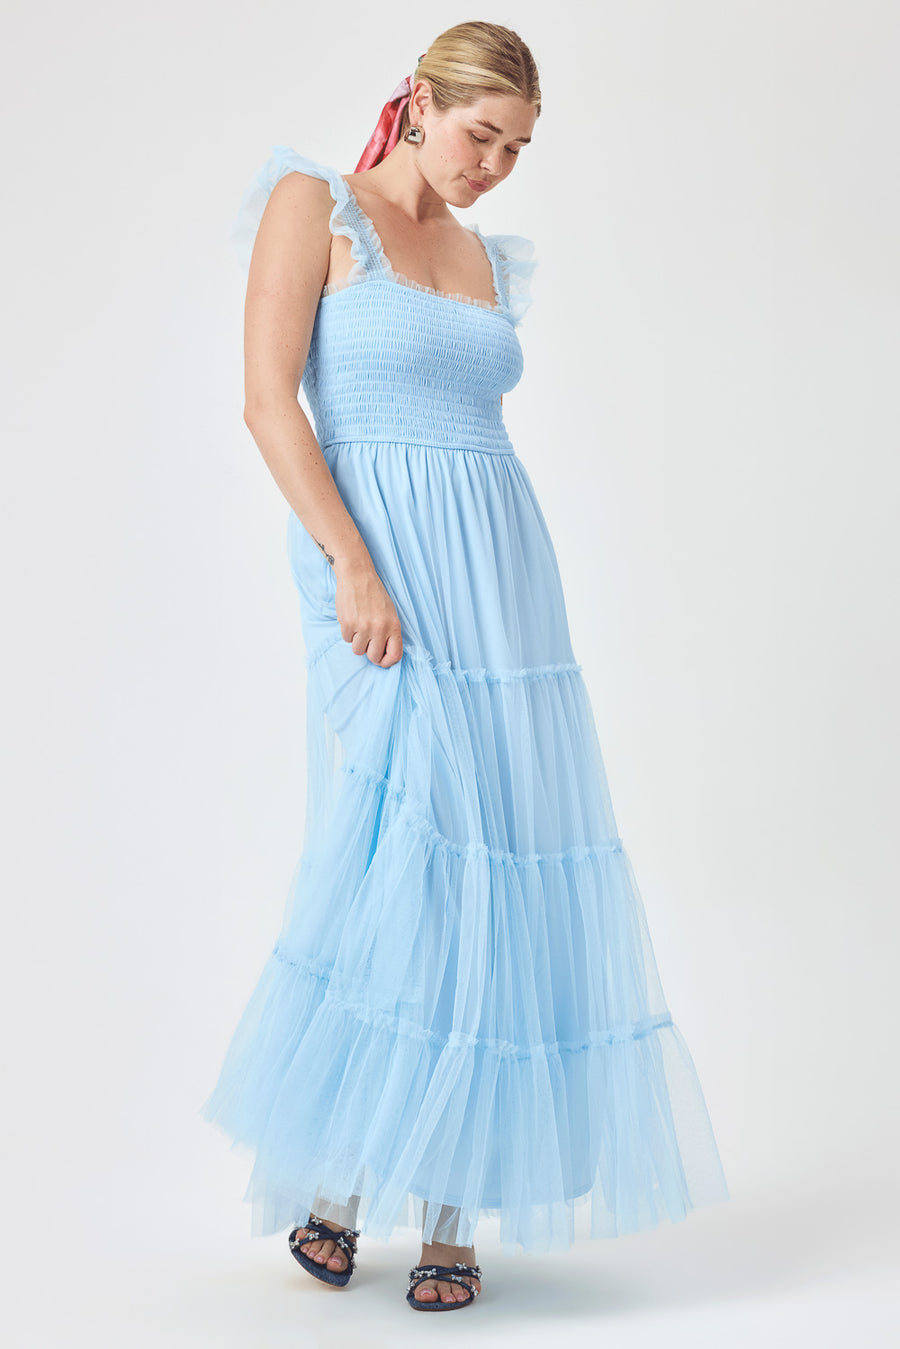 SMOCK TOP TULLE MAXI SUMMERSONG - Trixxi Clothing